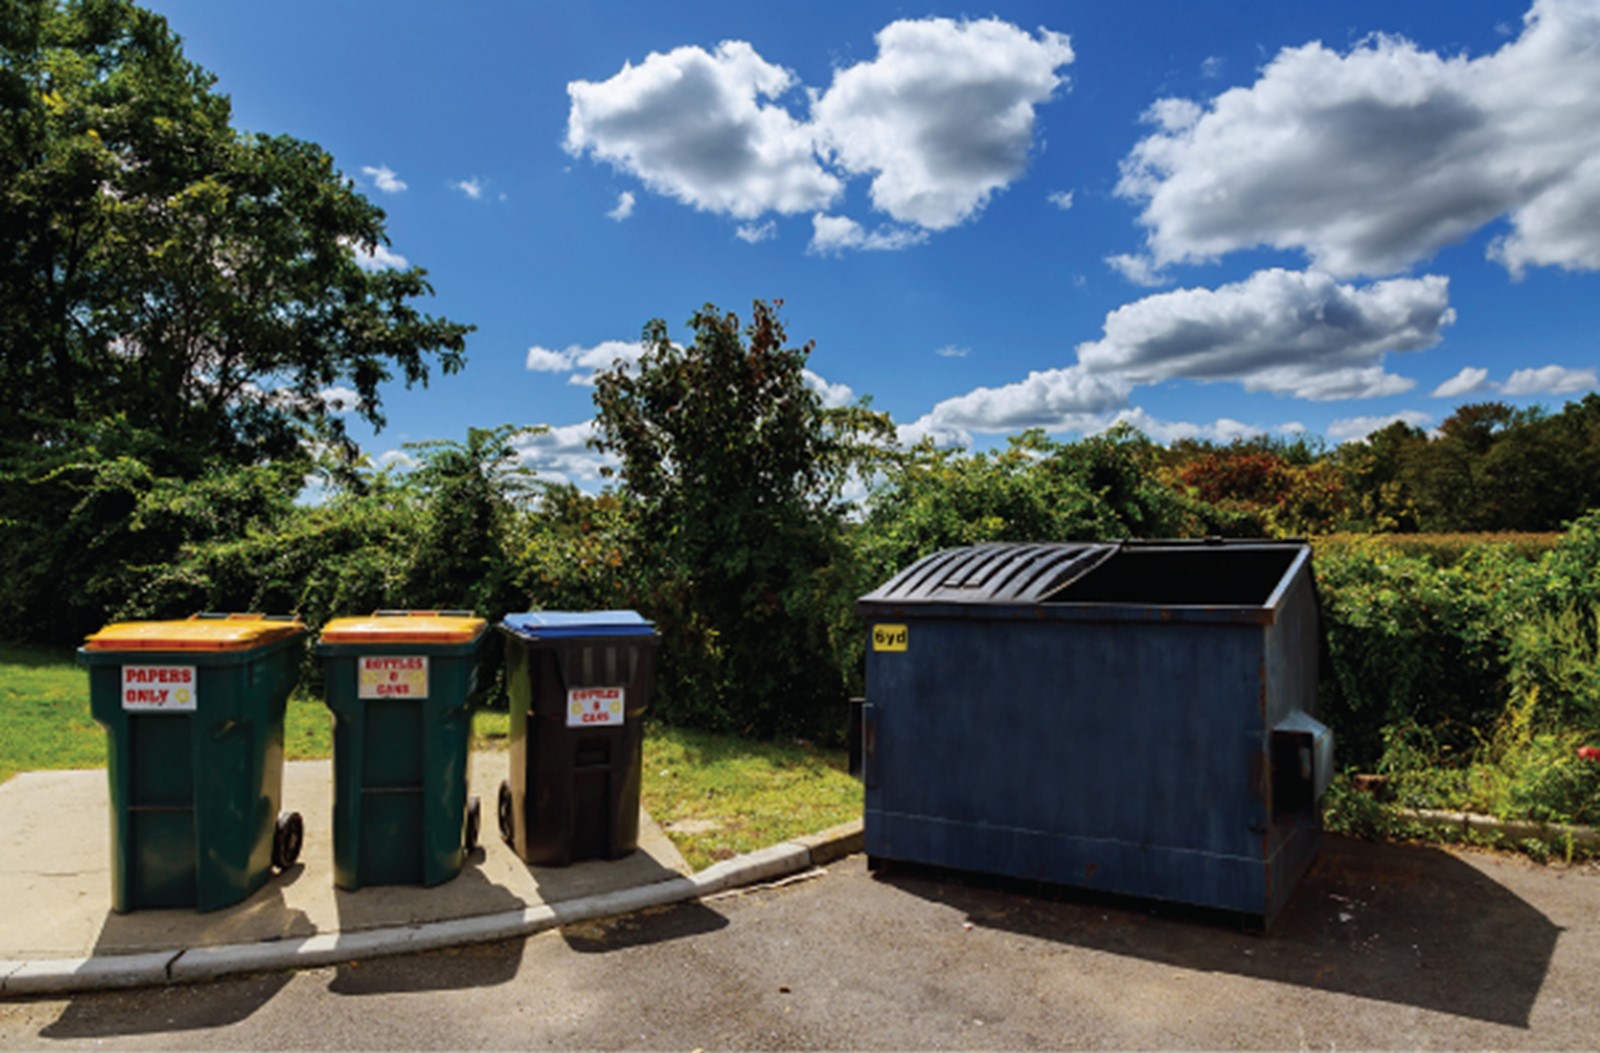 Commercial rubbish and recycling bins